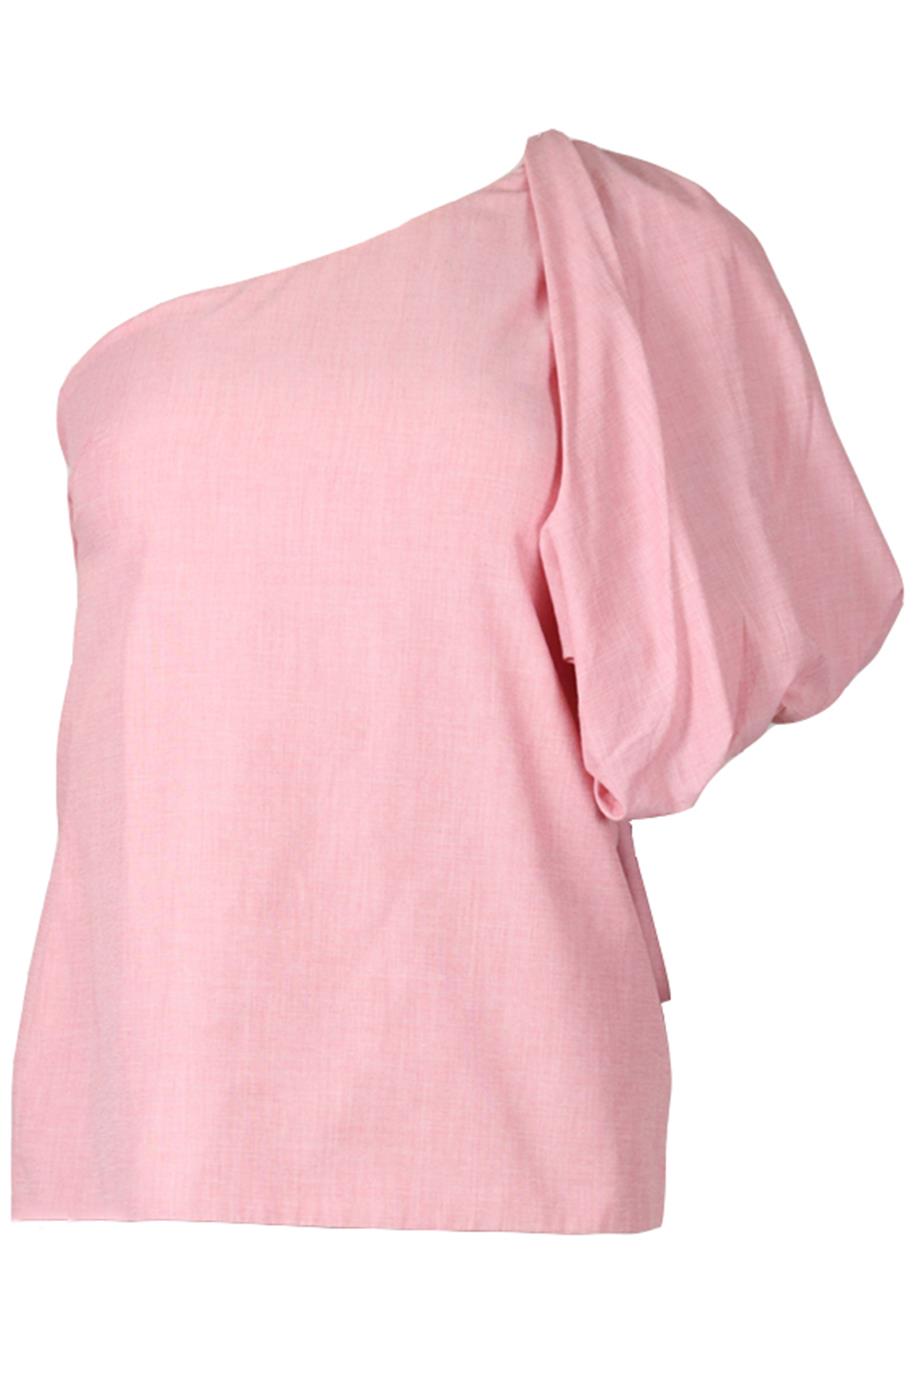 ROSIE ASSOULIN ONE SHOULDER COTTON TOP SMALL